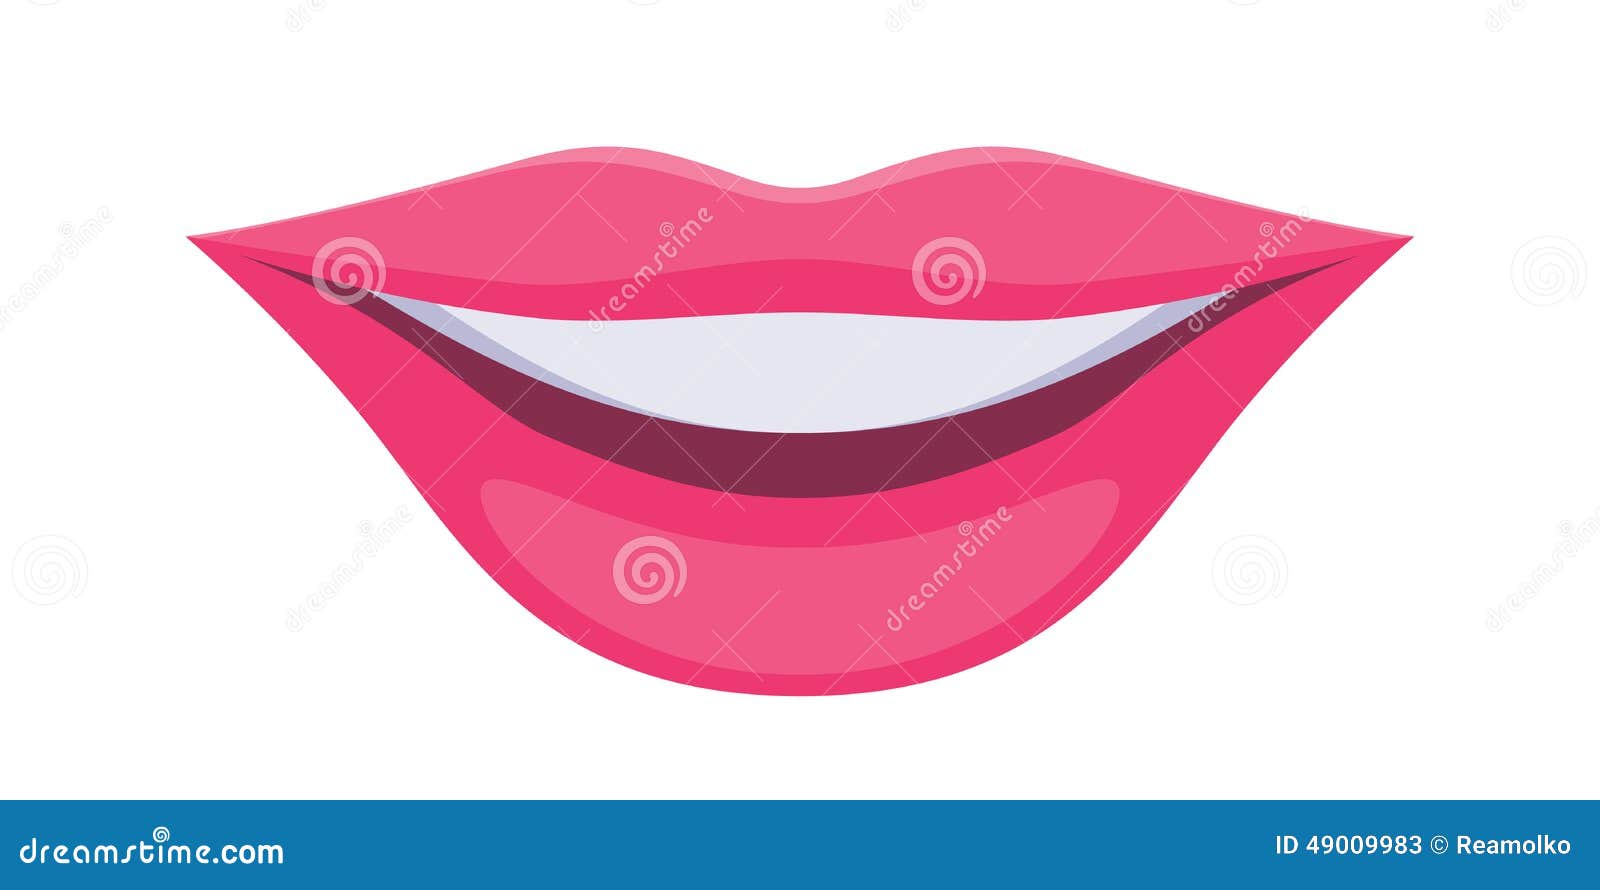 clipart smiling lips - photo #48